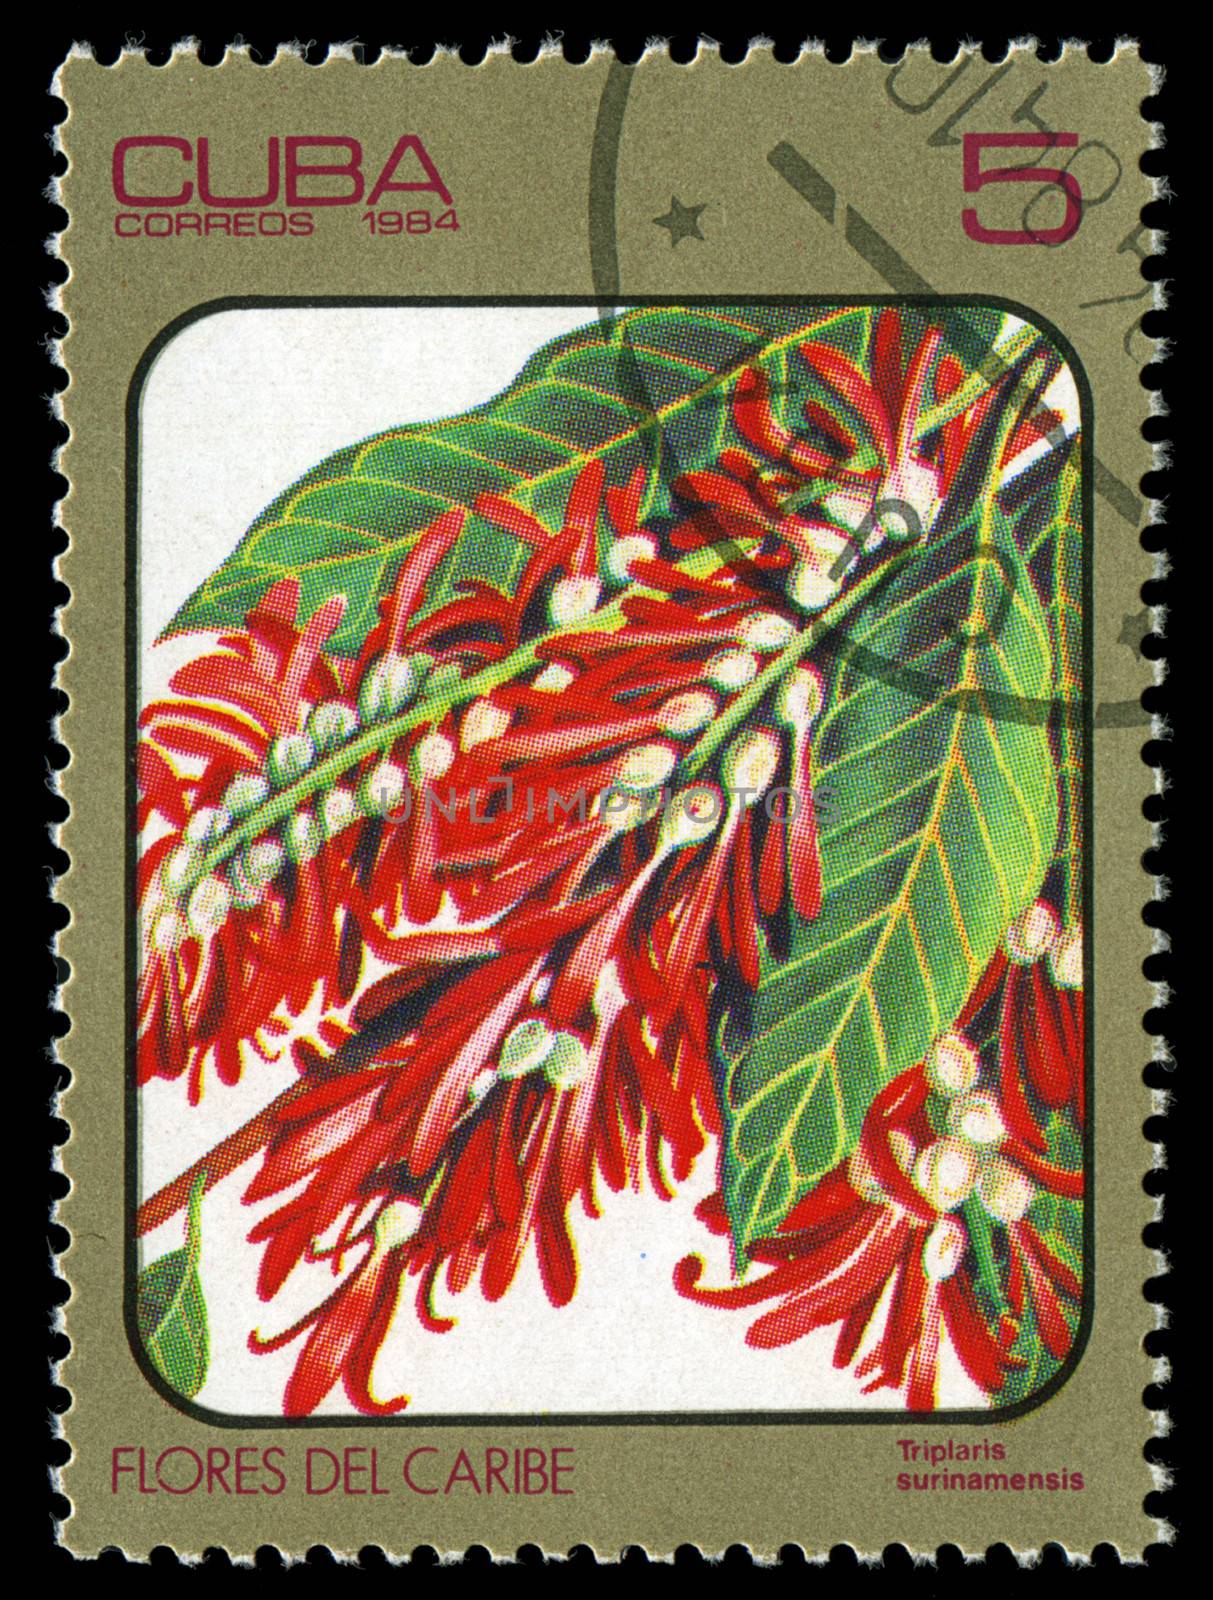 CUBA - CIRCA 1984: post stamp printed in Cuba shows image of triplaris surinamensis from Caribbean flowers series, Scott catalog 2689 A730 5c, circa 1984 by Zhukow